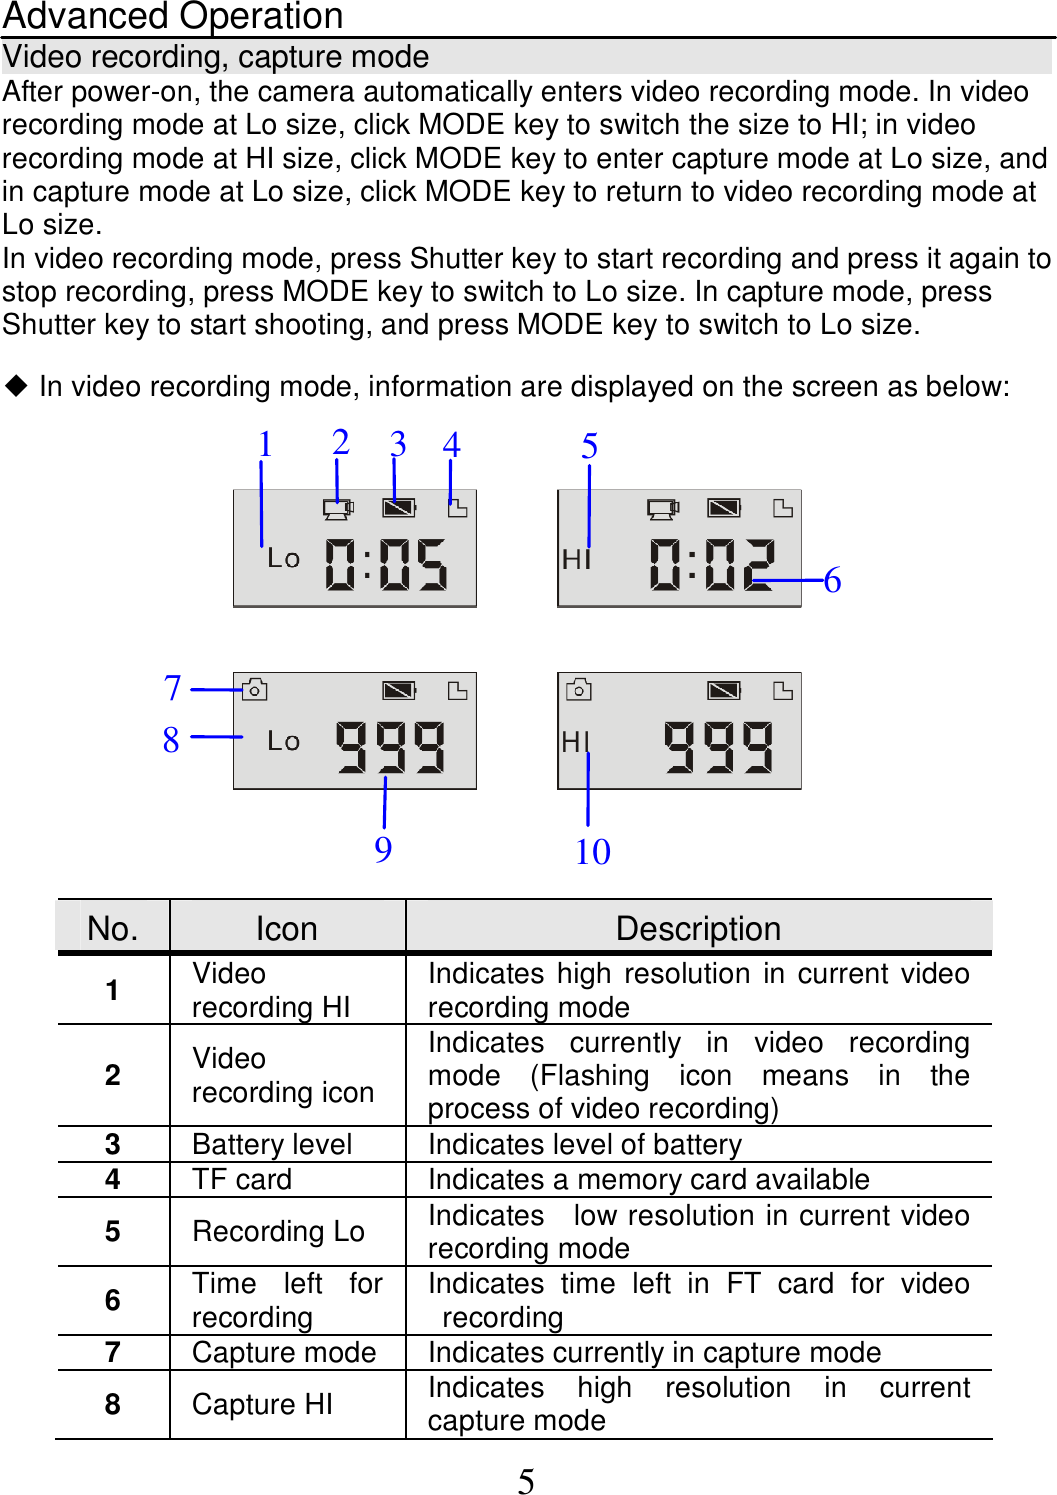  5 Advanced Operation  Video recording, capture mode                                                                                                                       After power-on, the camera automatically enters video recording mode. In video recording mode at Lo size, click MODE key to switch the size to HI; in video recording mode at HI size, click MODE key to enter capture mode at Lo size, and in capture mode at Lo size, click MODE key to return to video recording mode at Lo size. In video recording mode, press Shutter key to start recording and press it again to stop recording, press MODE key to switch to Lo size. In capture mode, press Shutter key to start shooting, and press MODE key to switch to Lo size.  ◆ In video recording mode, information are displayed on the screen as below:        No. Icon  Description 1  Video recording HI  Indicates high resolution in current video recording mode 2  Video recording icon Indicates  currently  in  video  recording mode  (Flashing  icon  means  in  the process of video recording) 3  Battery level  Indicates level of battery 4  TF card Indicates a memory card available 5  Recording Lo  Indicates    low resolution in current video recording mode   6  Time  left  for recording  Indicates  time  left  in  FT  card  for  video recording 7  Capture mode Indicates currently in capture mode 8  Capture HI  Indicates  high  resolution  in  current capture mode 4 2 5 3 1 10 9 6 7 8 